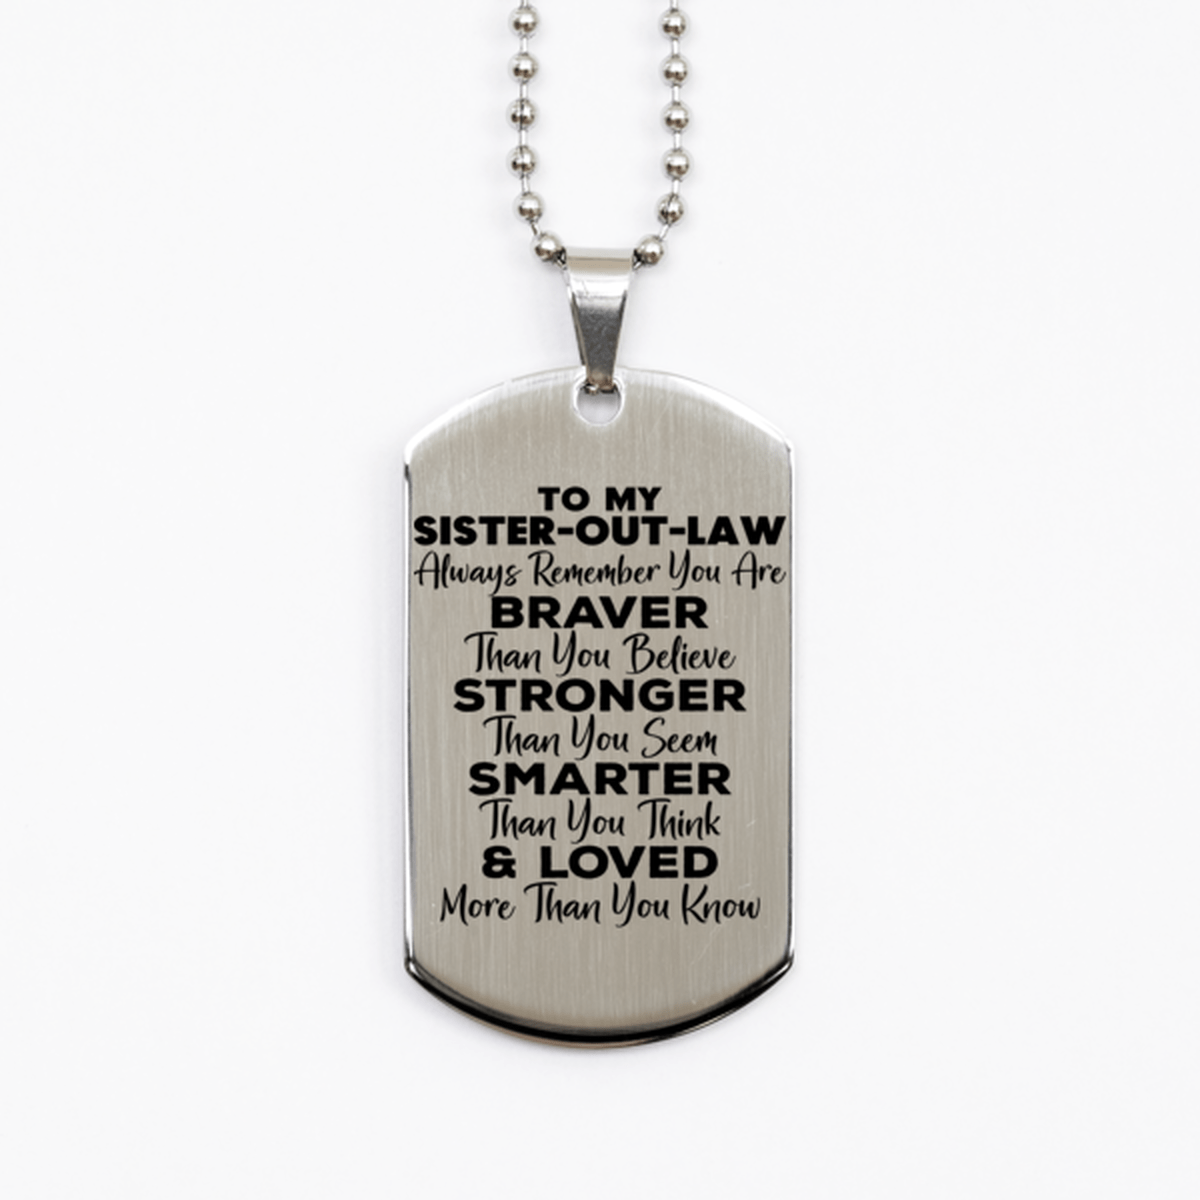 Motivational Sister-out-law Silver Dog Tag Necklace, Sister-out-law Always Remember You Are Braver Than You Believe, Best Birthday Gifts for Sister-out-law